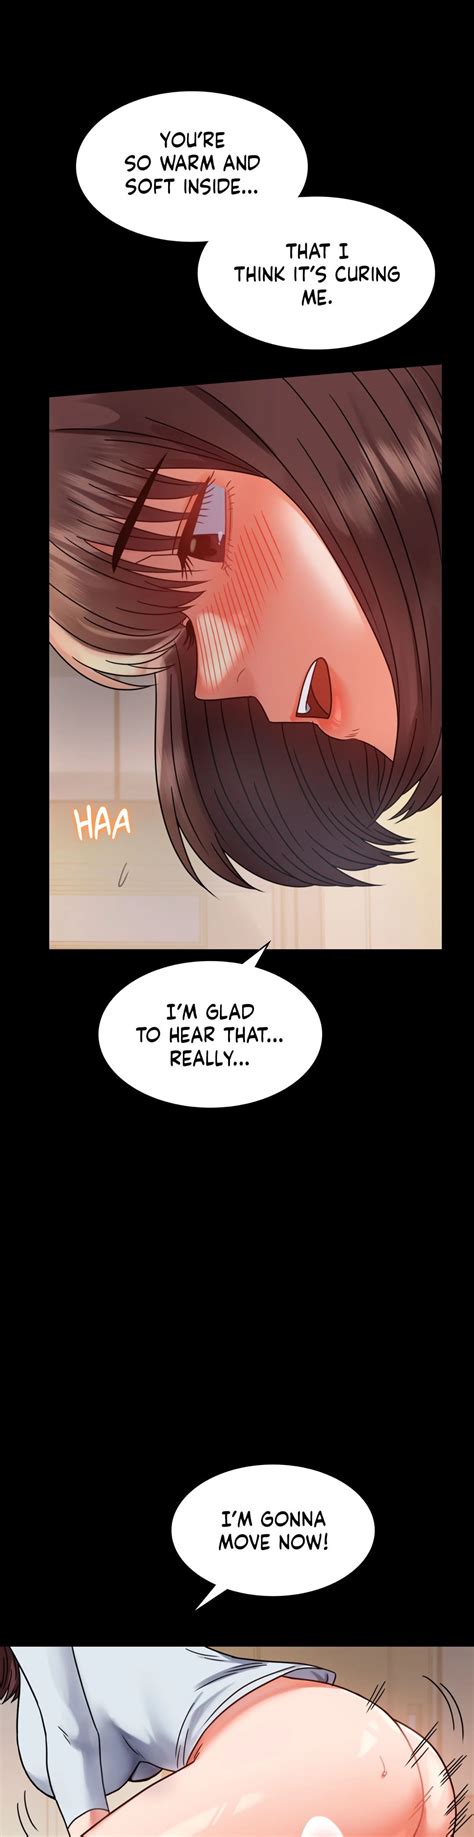 Introduction to an affair manhwa. Introduction to an affair Raw. chap 74 ; chap 73 ; chap 72 ; chap 71 ; chap 70 ; chap 69 ; chap 68 ; chap 67 ; chap 66 